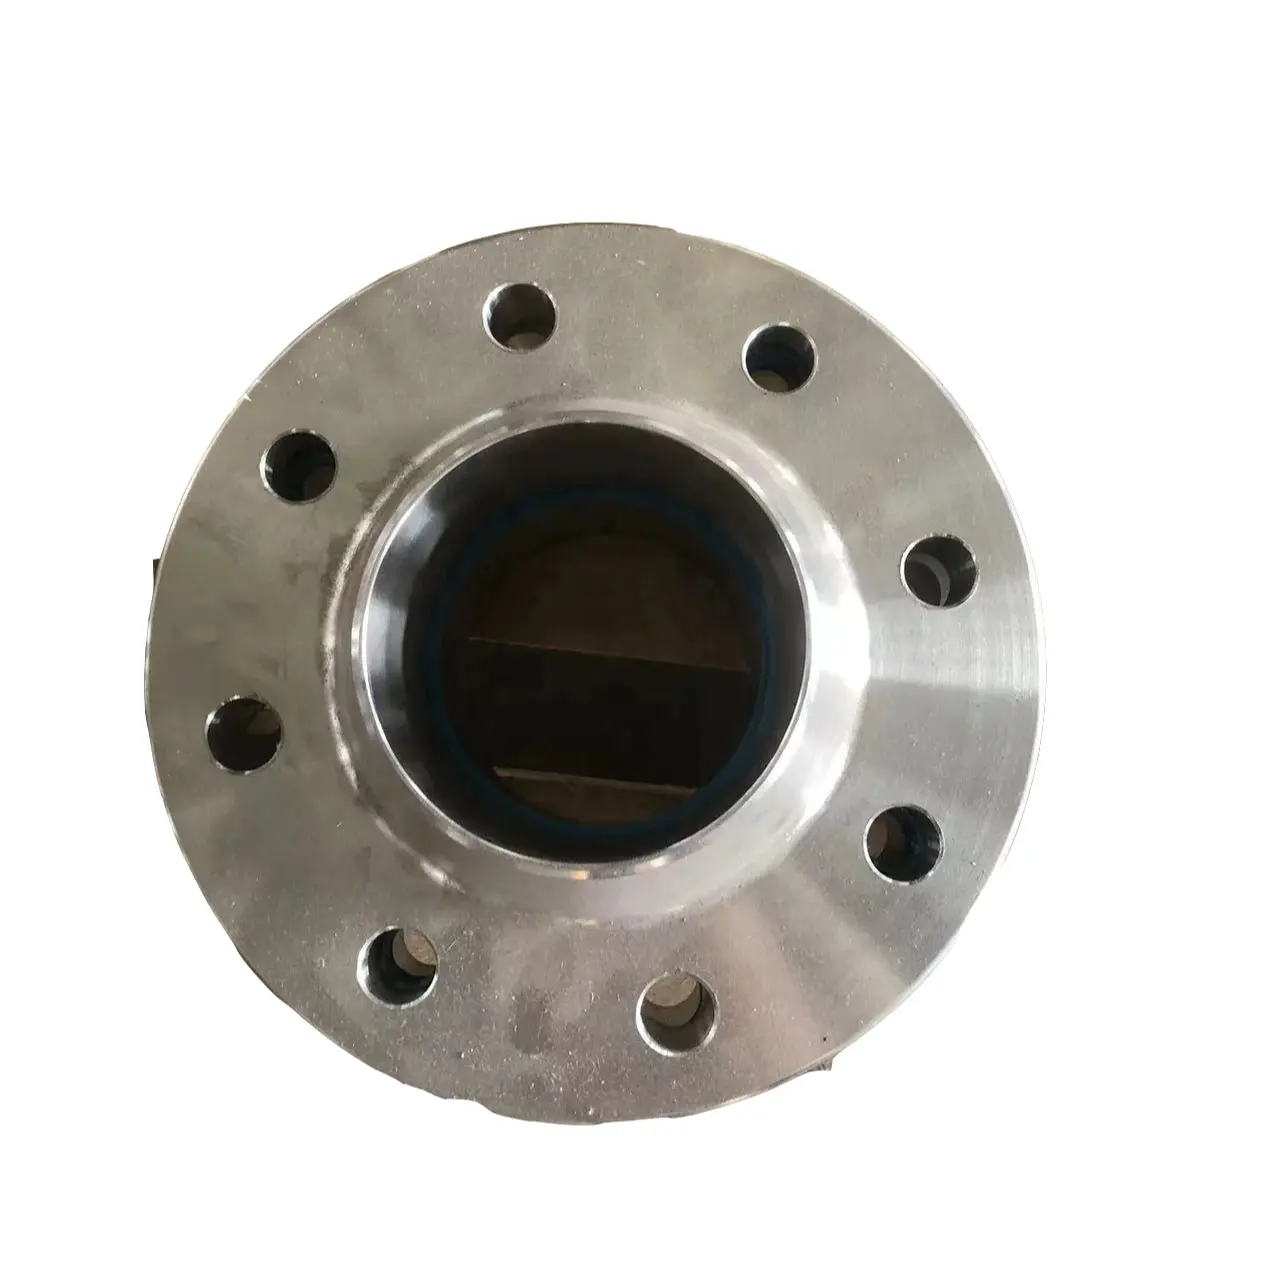 1199 Diaphragm Seal System Flange Flange multi-function accessory spare part original high quality